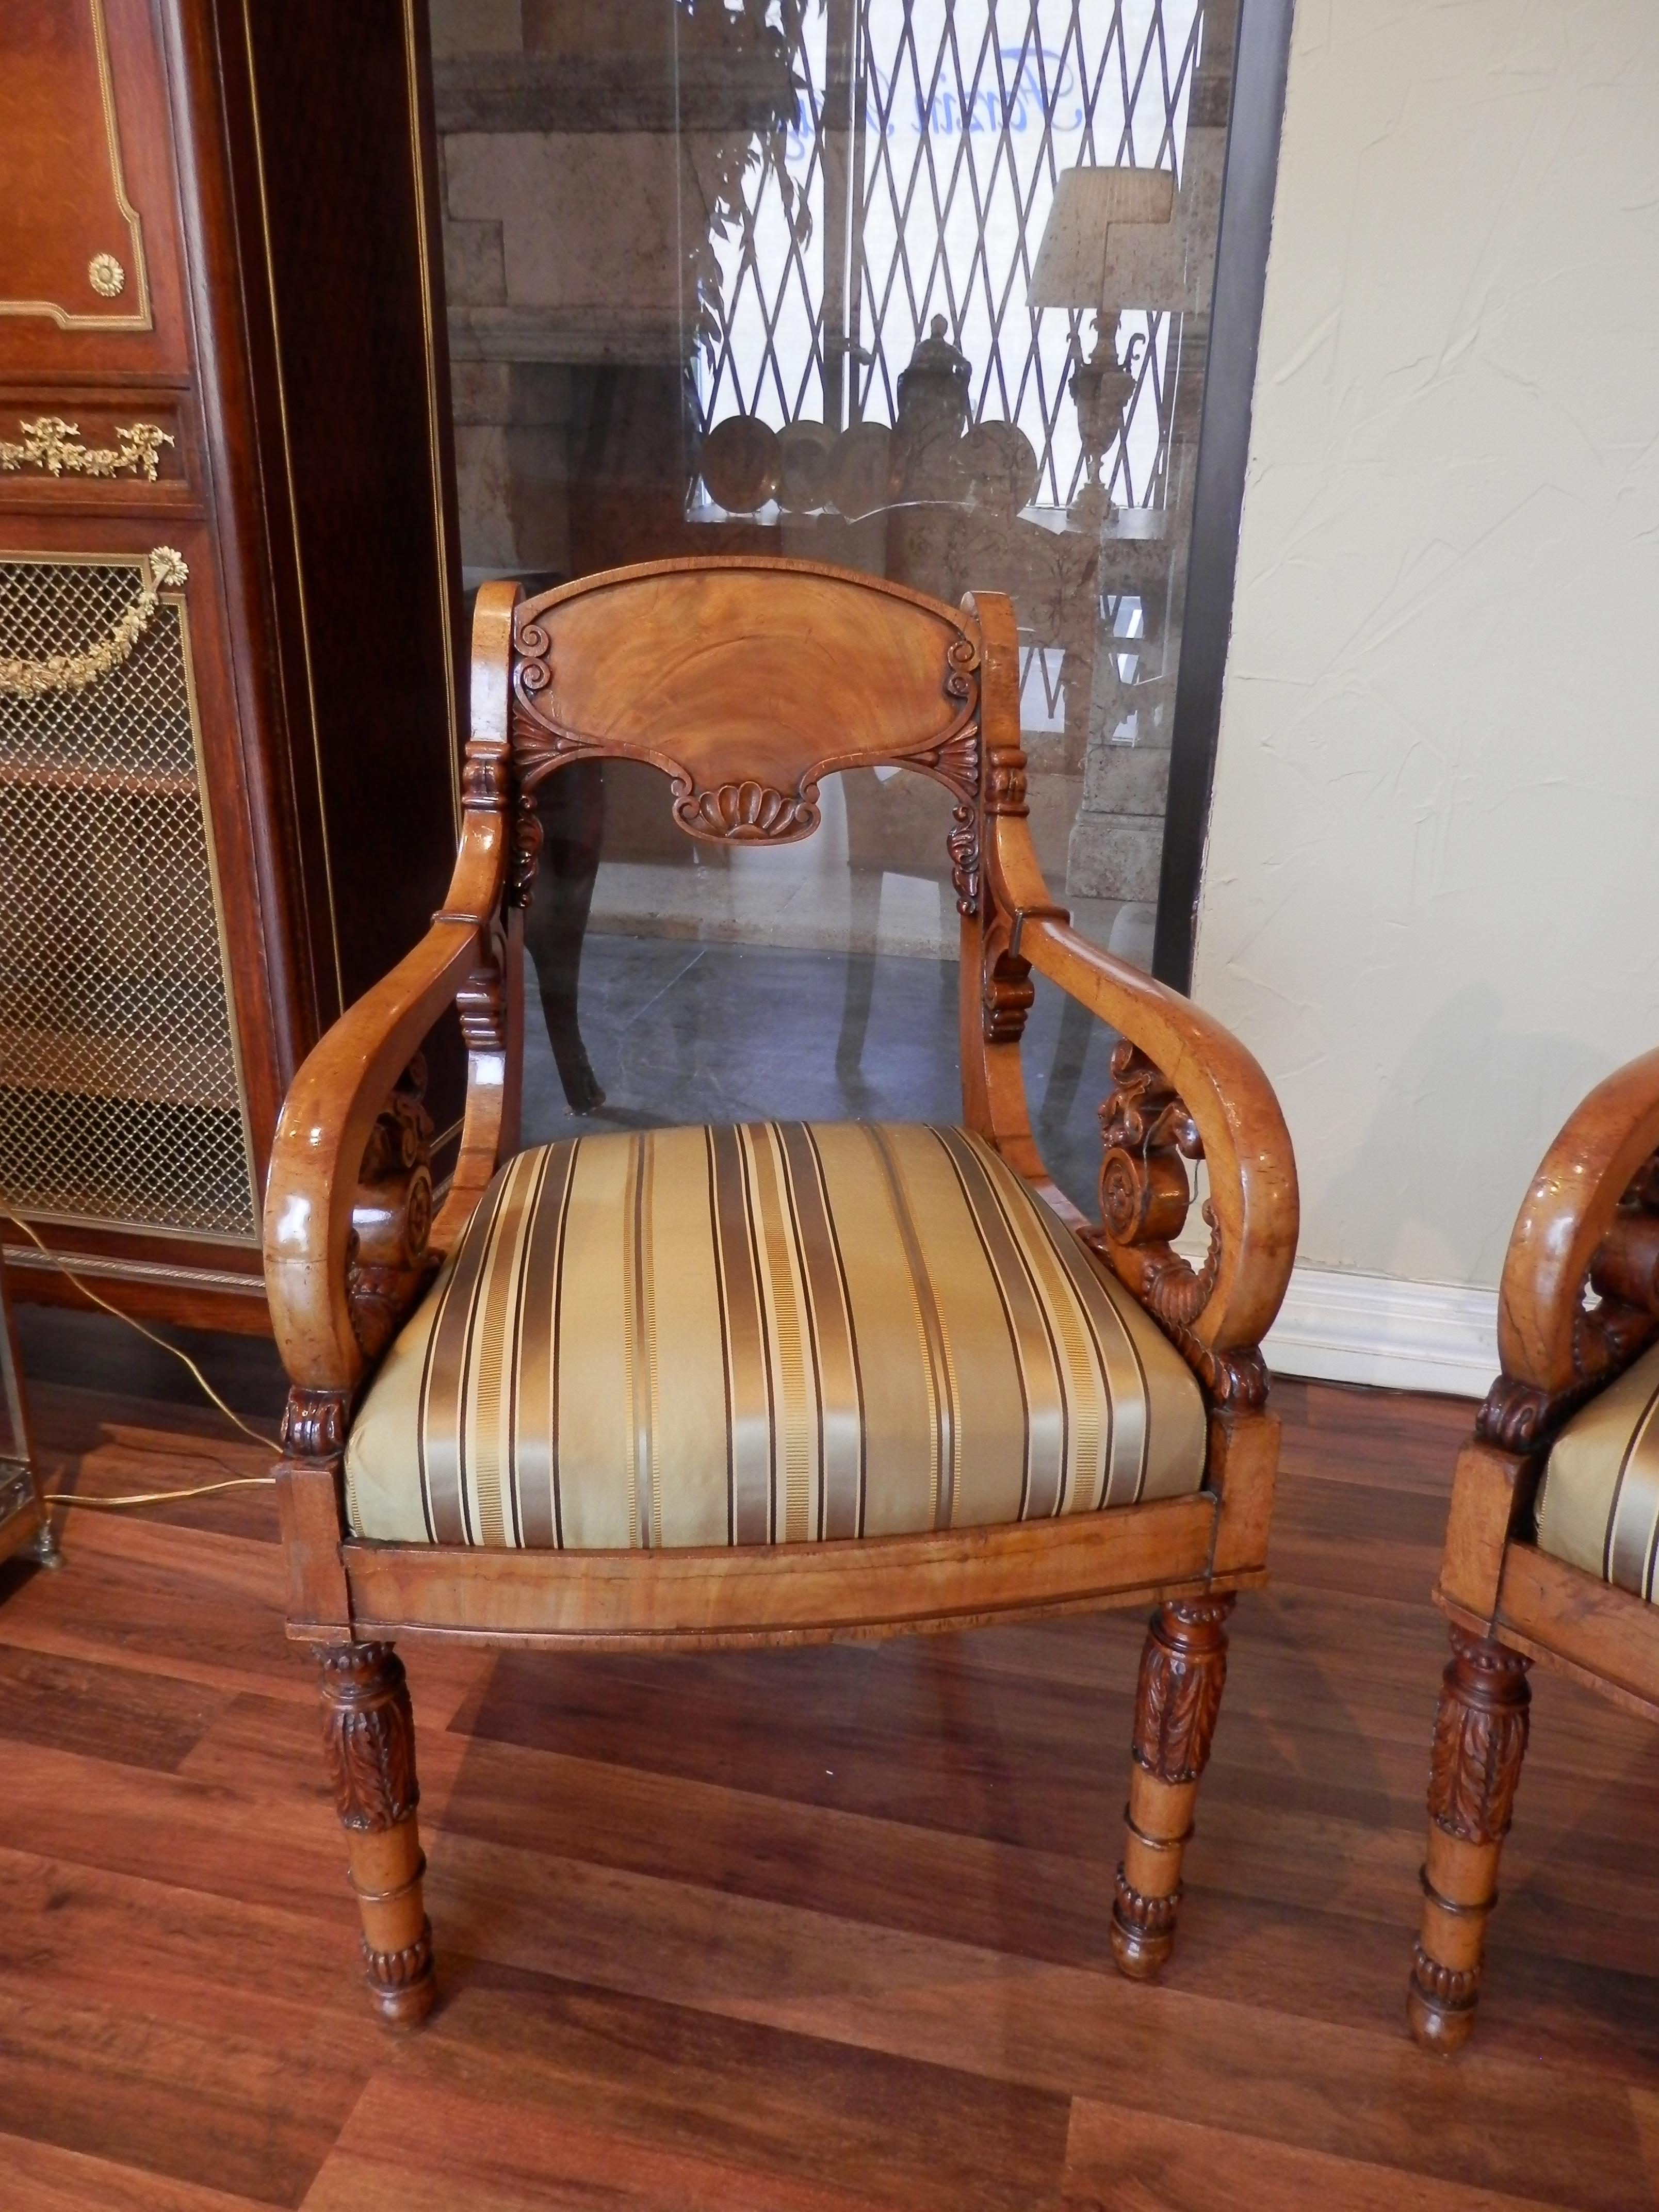 Beautiful and rare pair of early 19th century Baltic walnut carved open arm chairs. The seats are covered in a striped silk material.